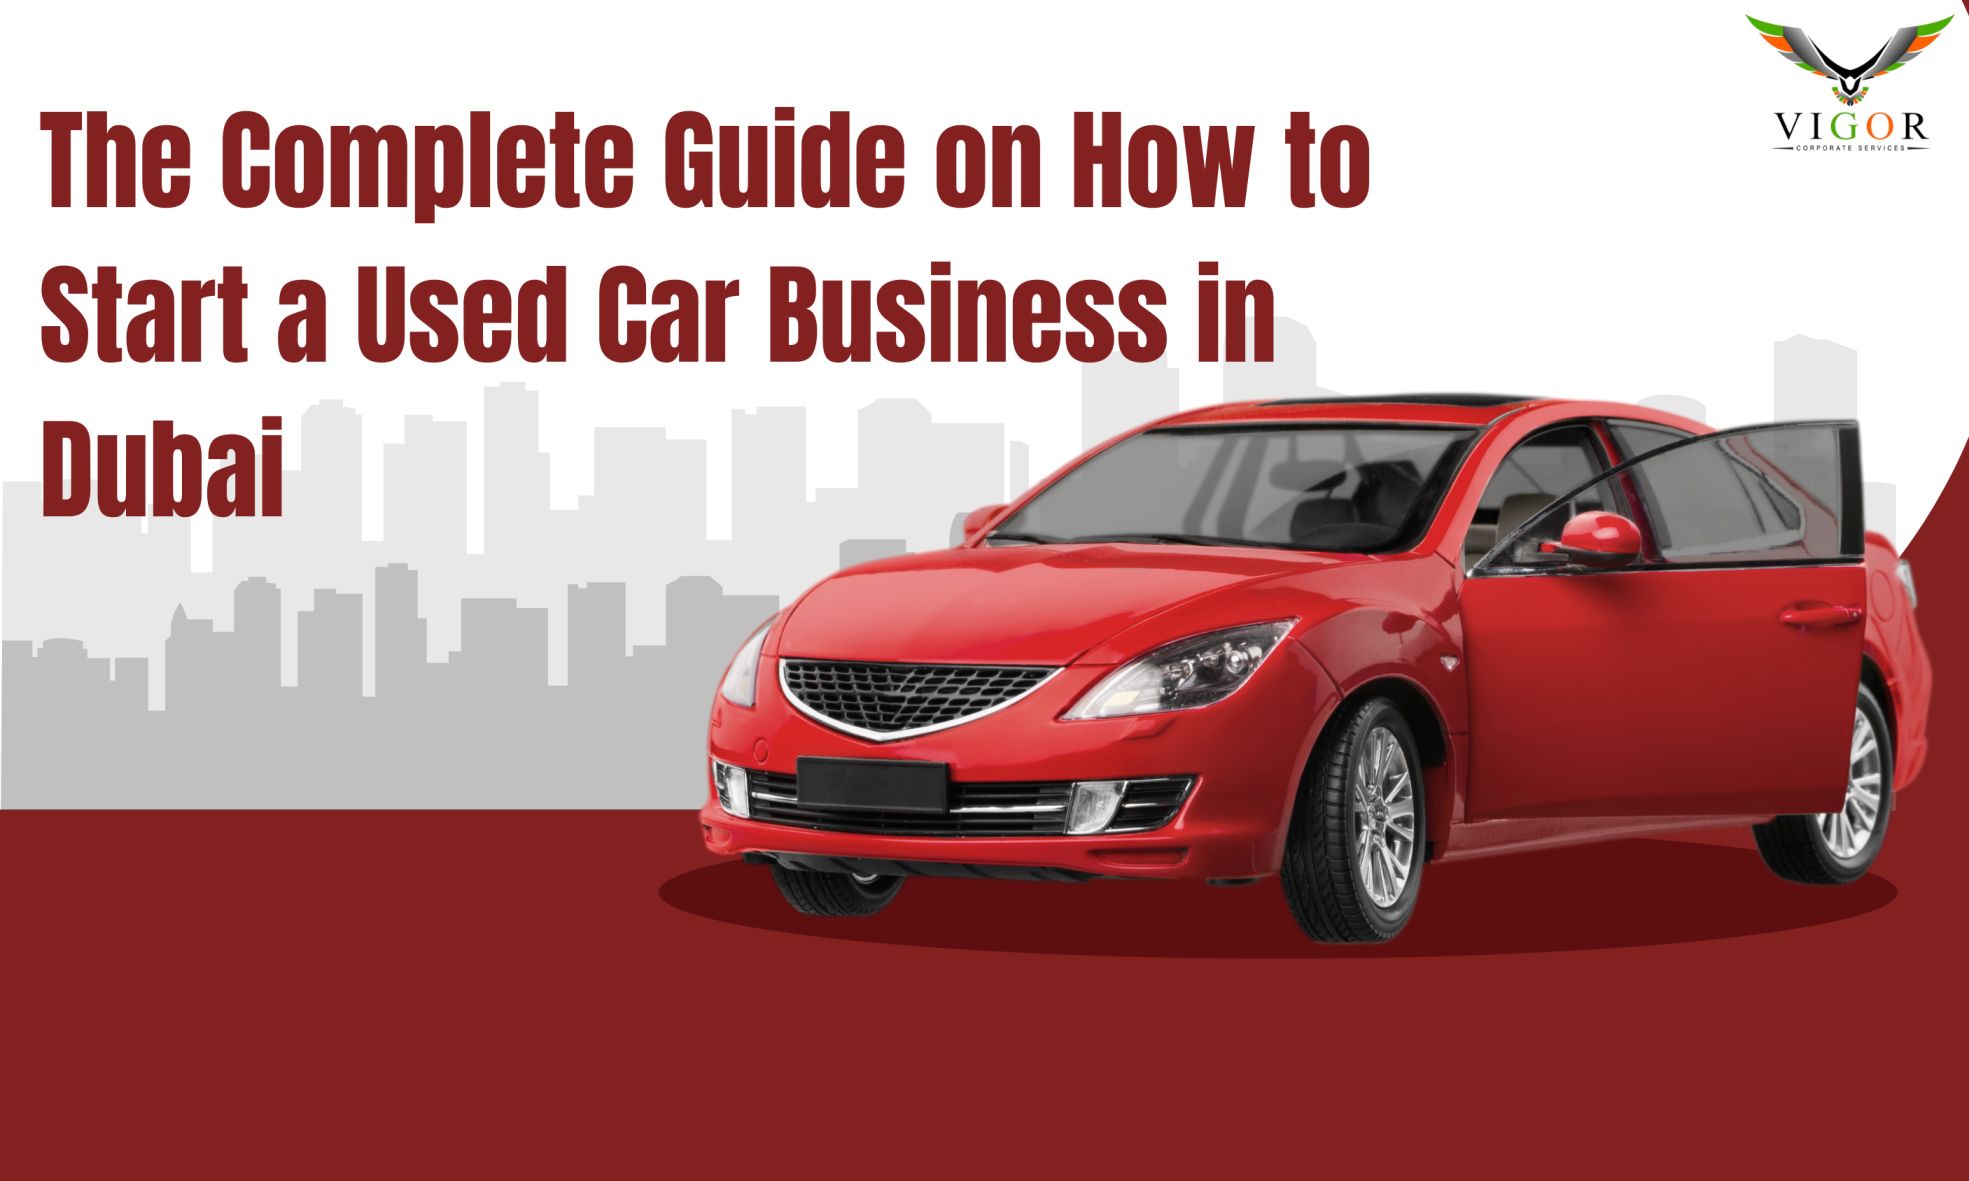 The Complete Guide on How to Start a Used Car Business in Dubai